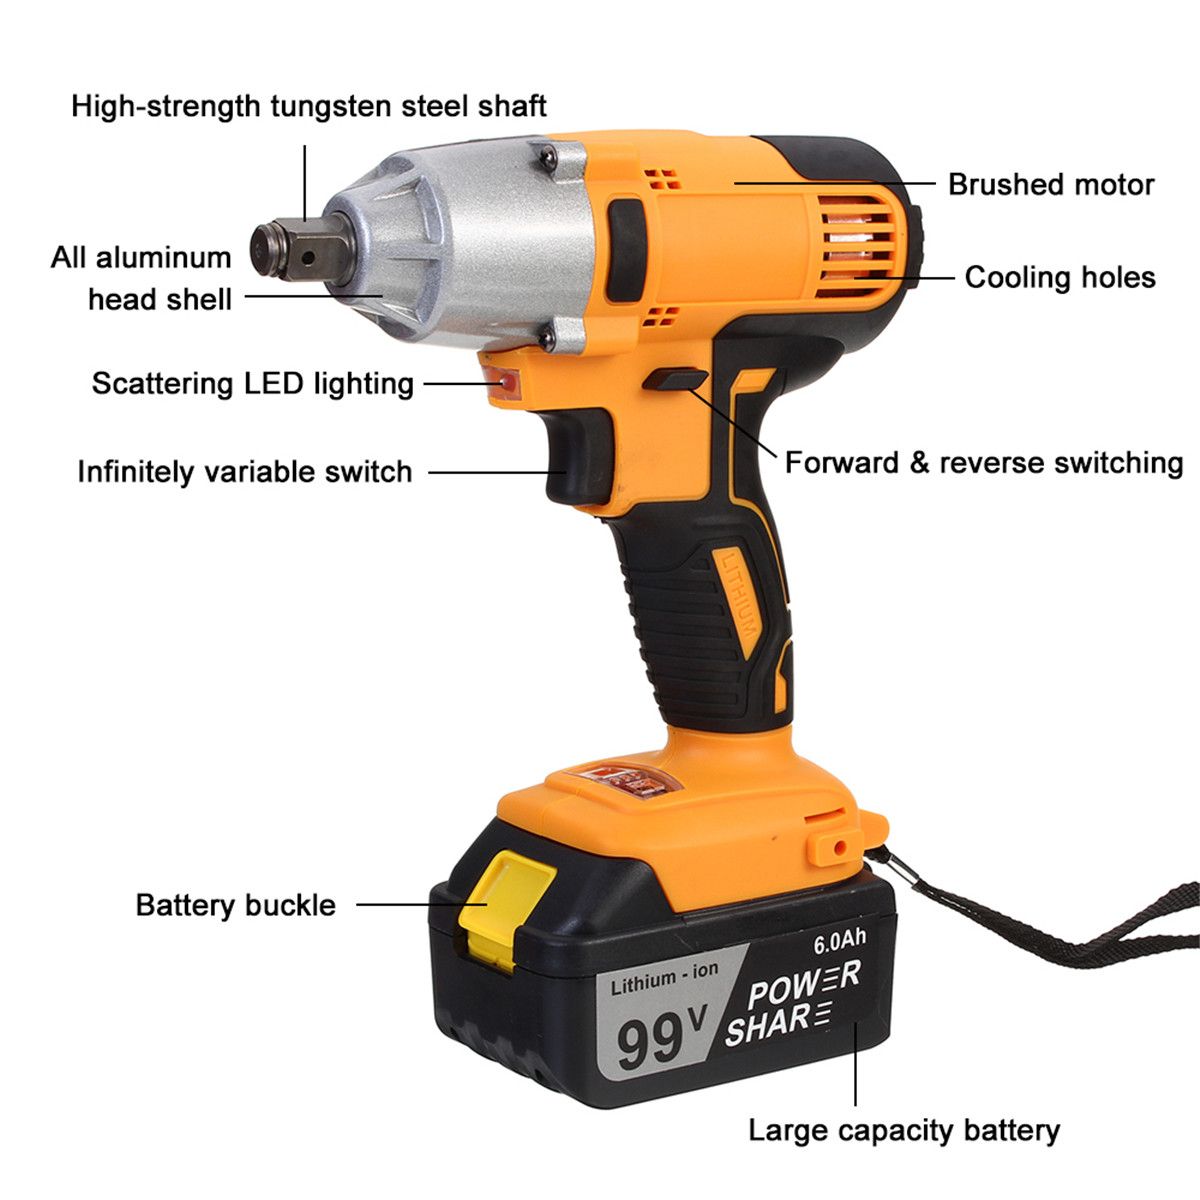 12000mAh-320Nm-Electric-Powerful-Cordless-Impact-Wrench-LED-Light-Torque-Drill-Machine-1727115